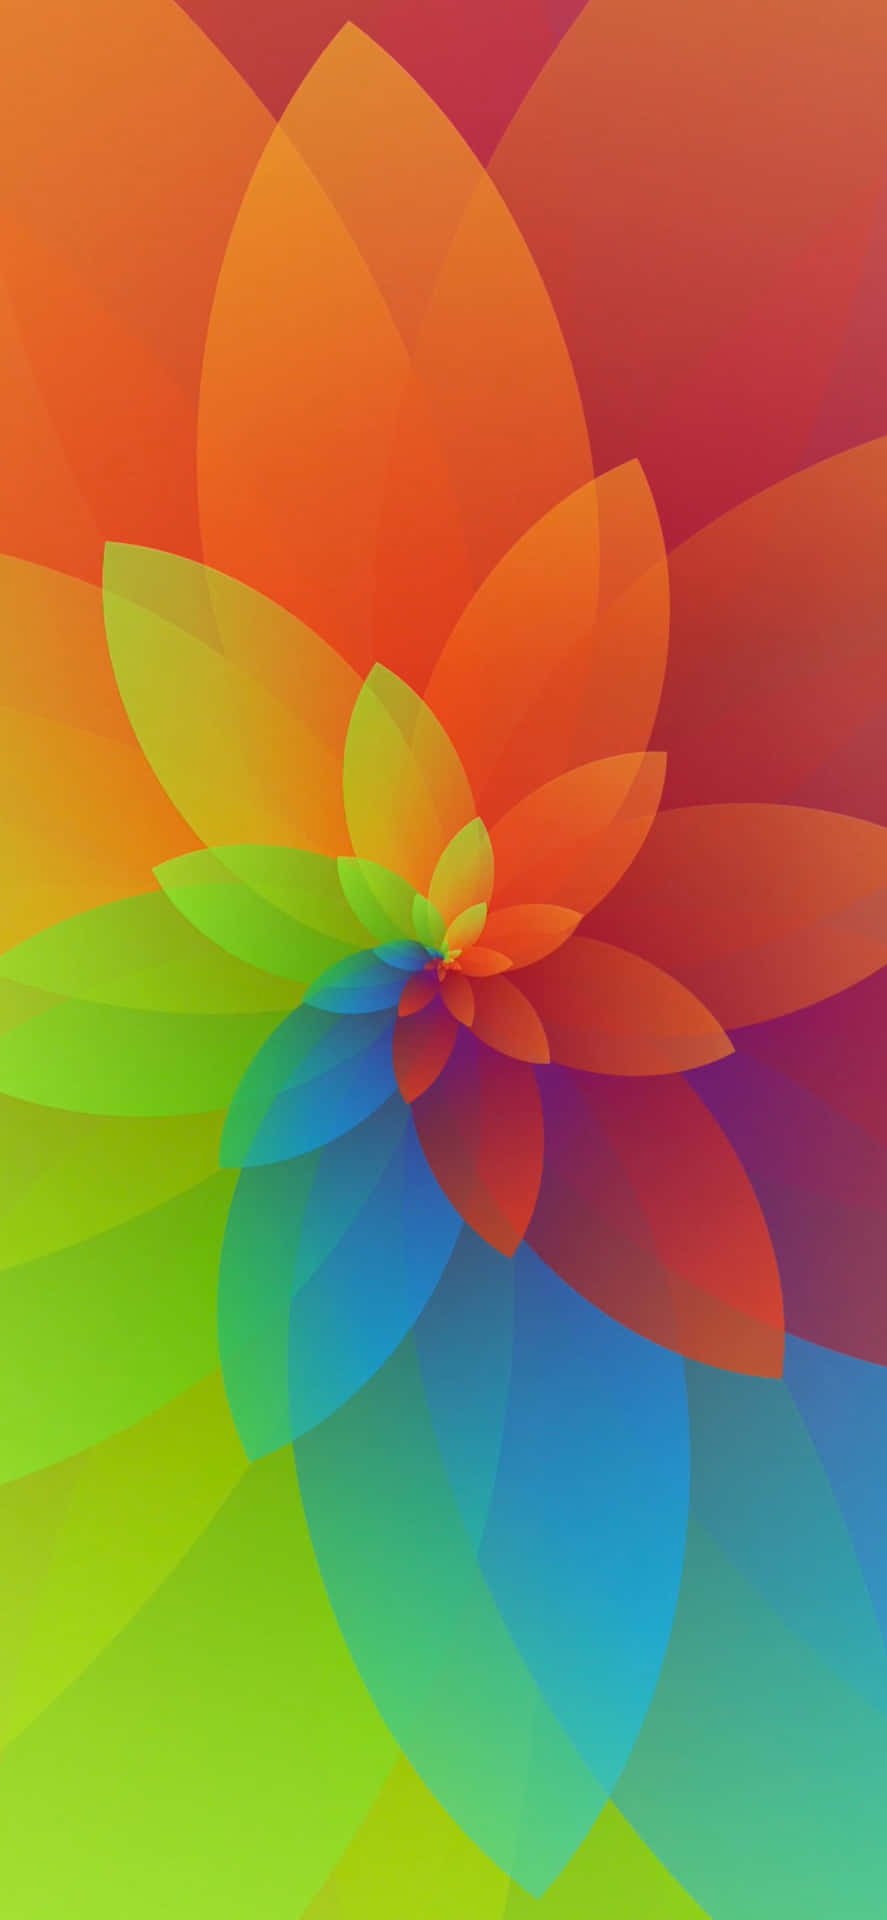 A Colorful Flower With A Rainbow Background